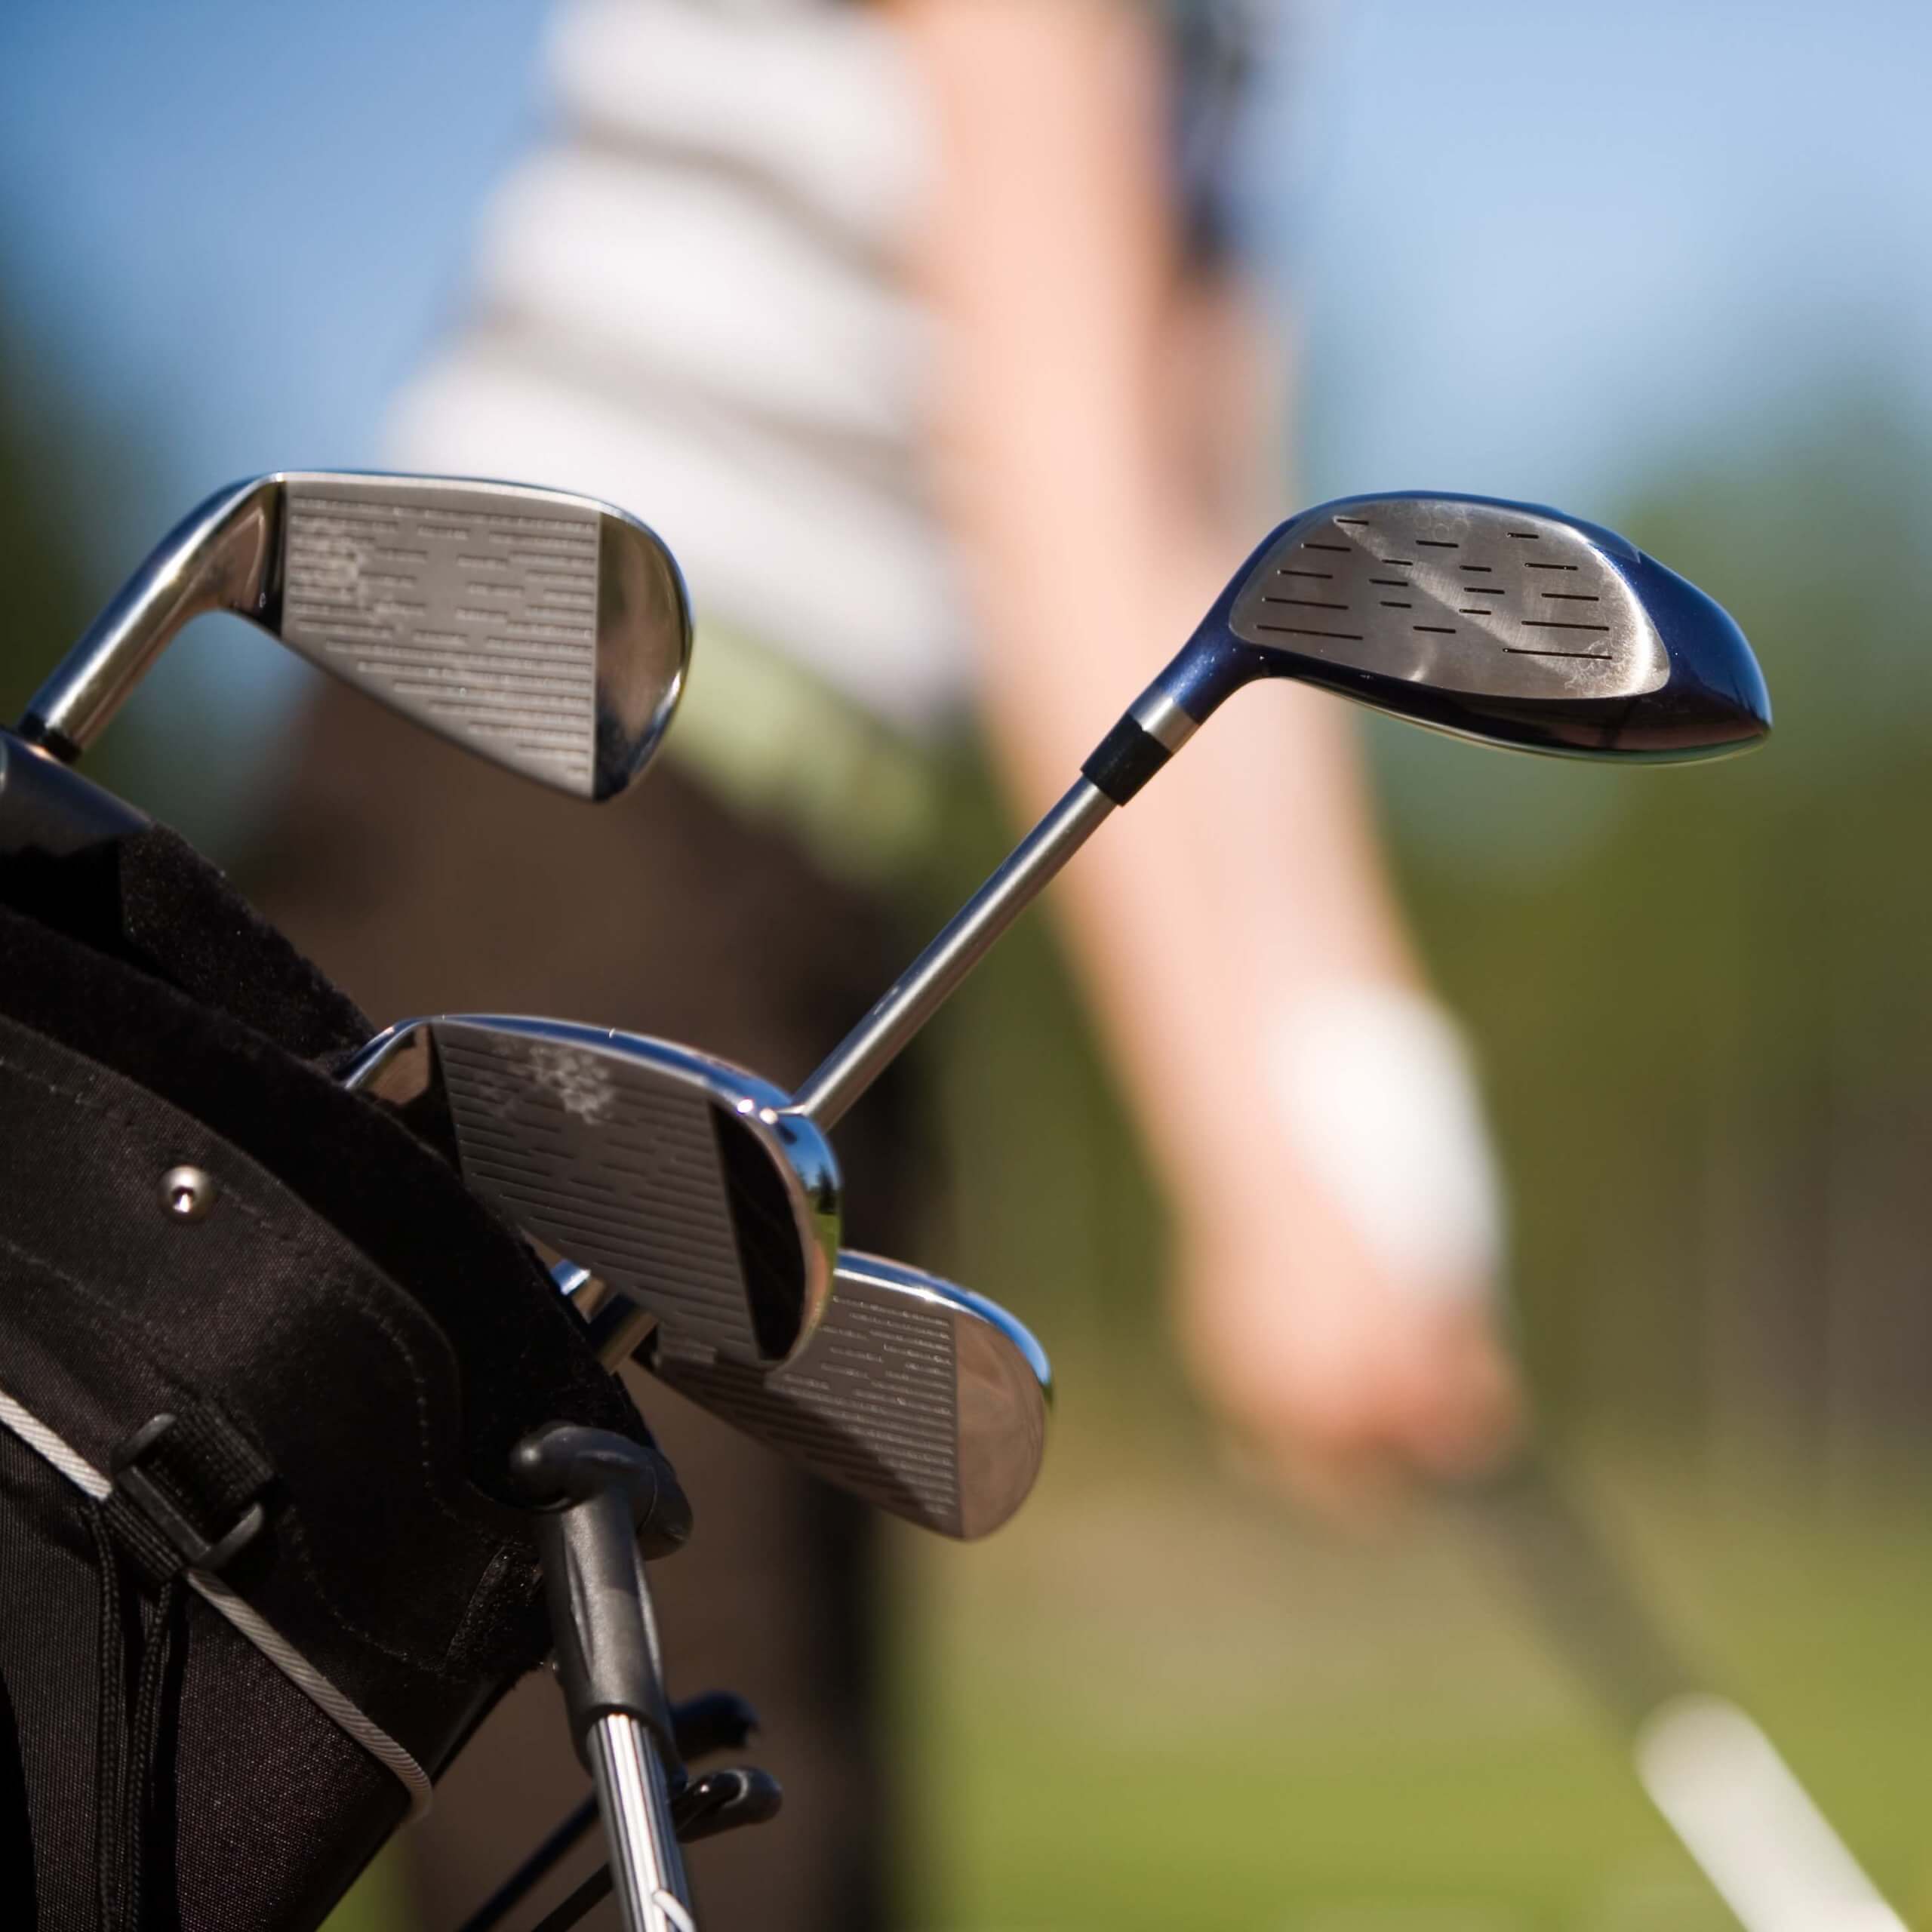 Here's how golf clubs get their names from golf club companies